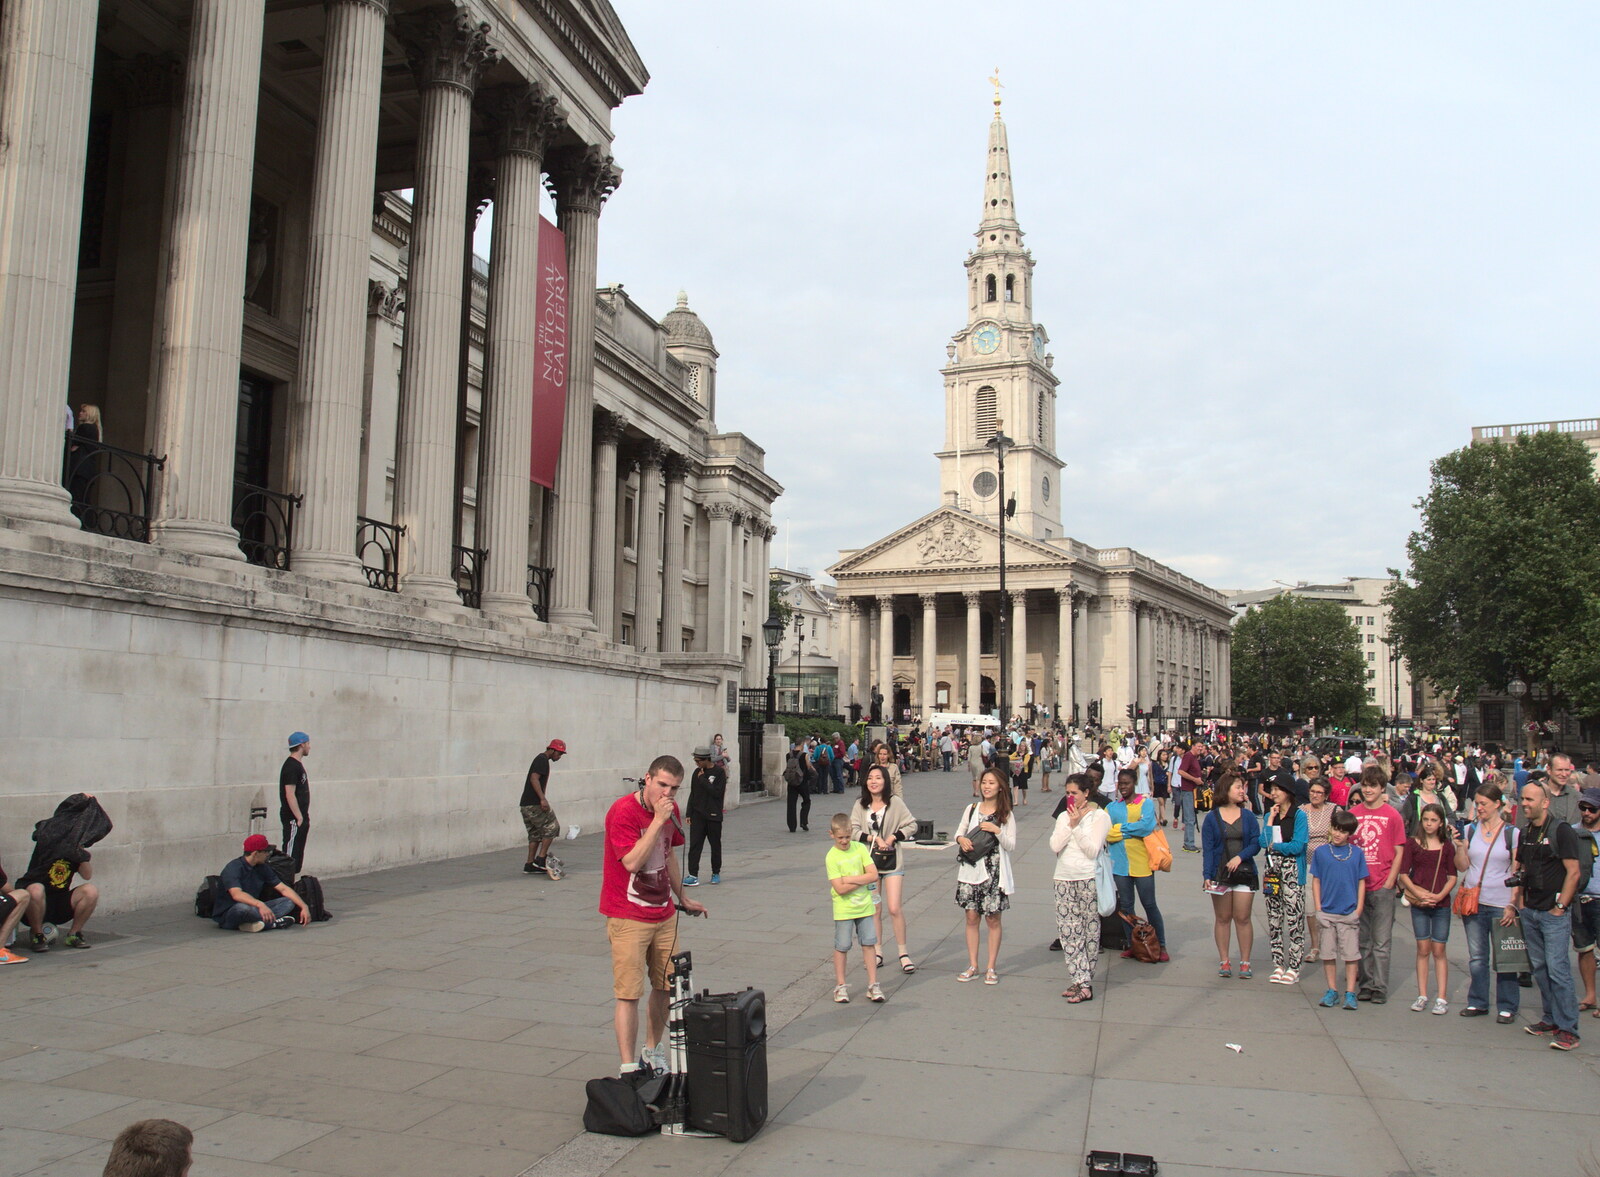 More beat-boxing, near St Martin in the Fields from SwiftKey Innovation Days, The Haymarket, London - 27th June 2014